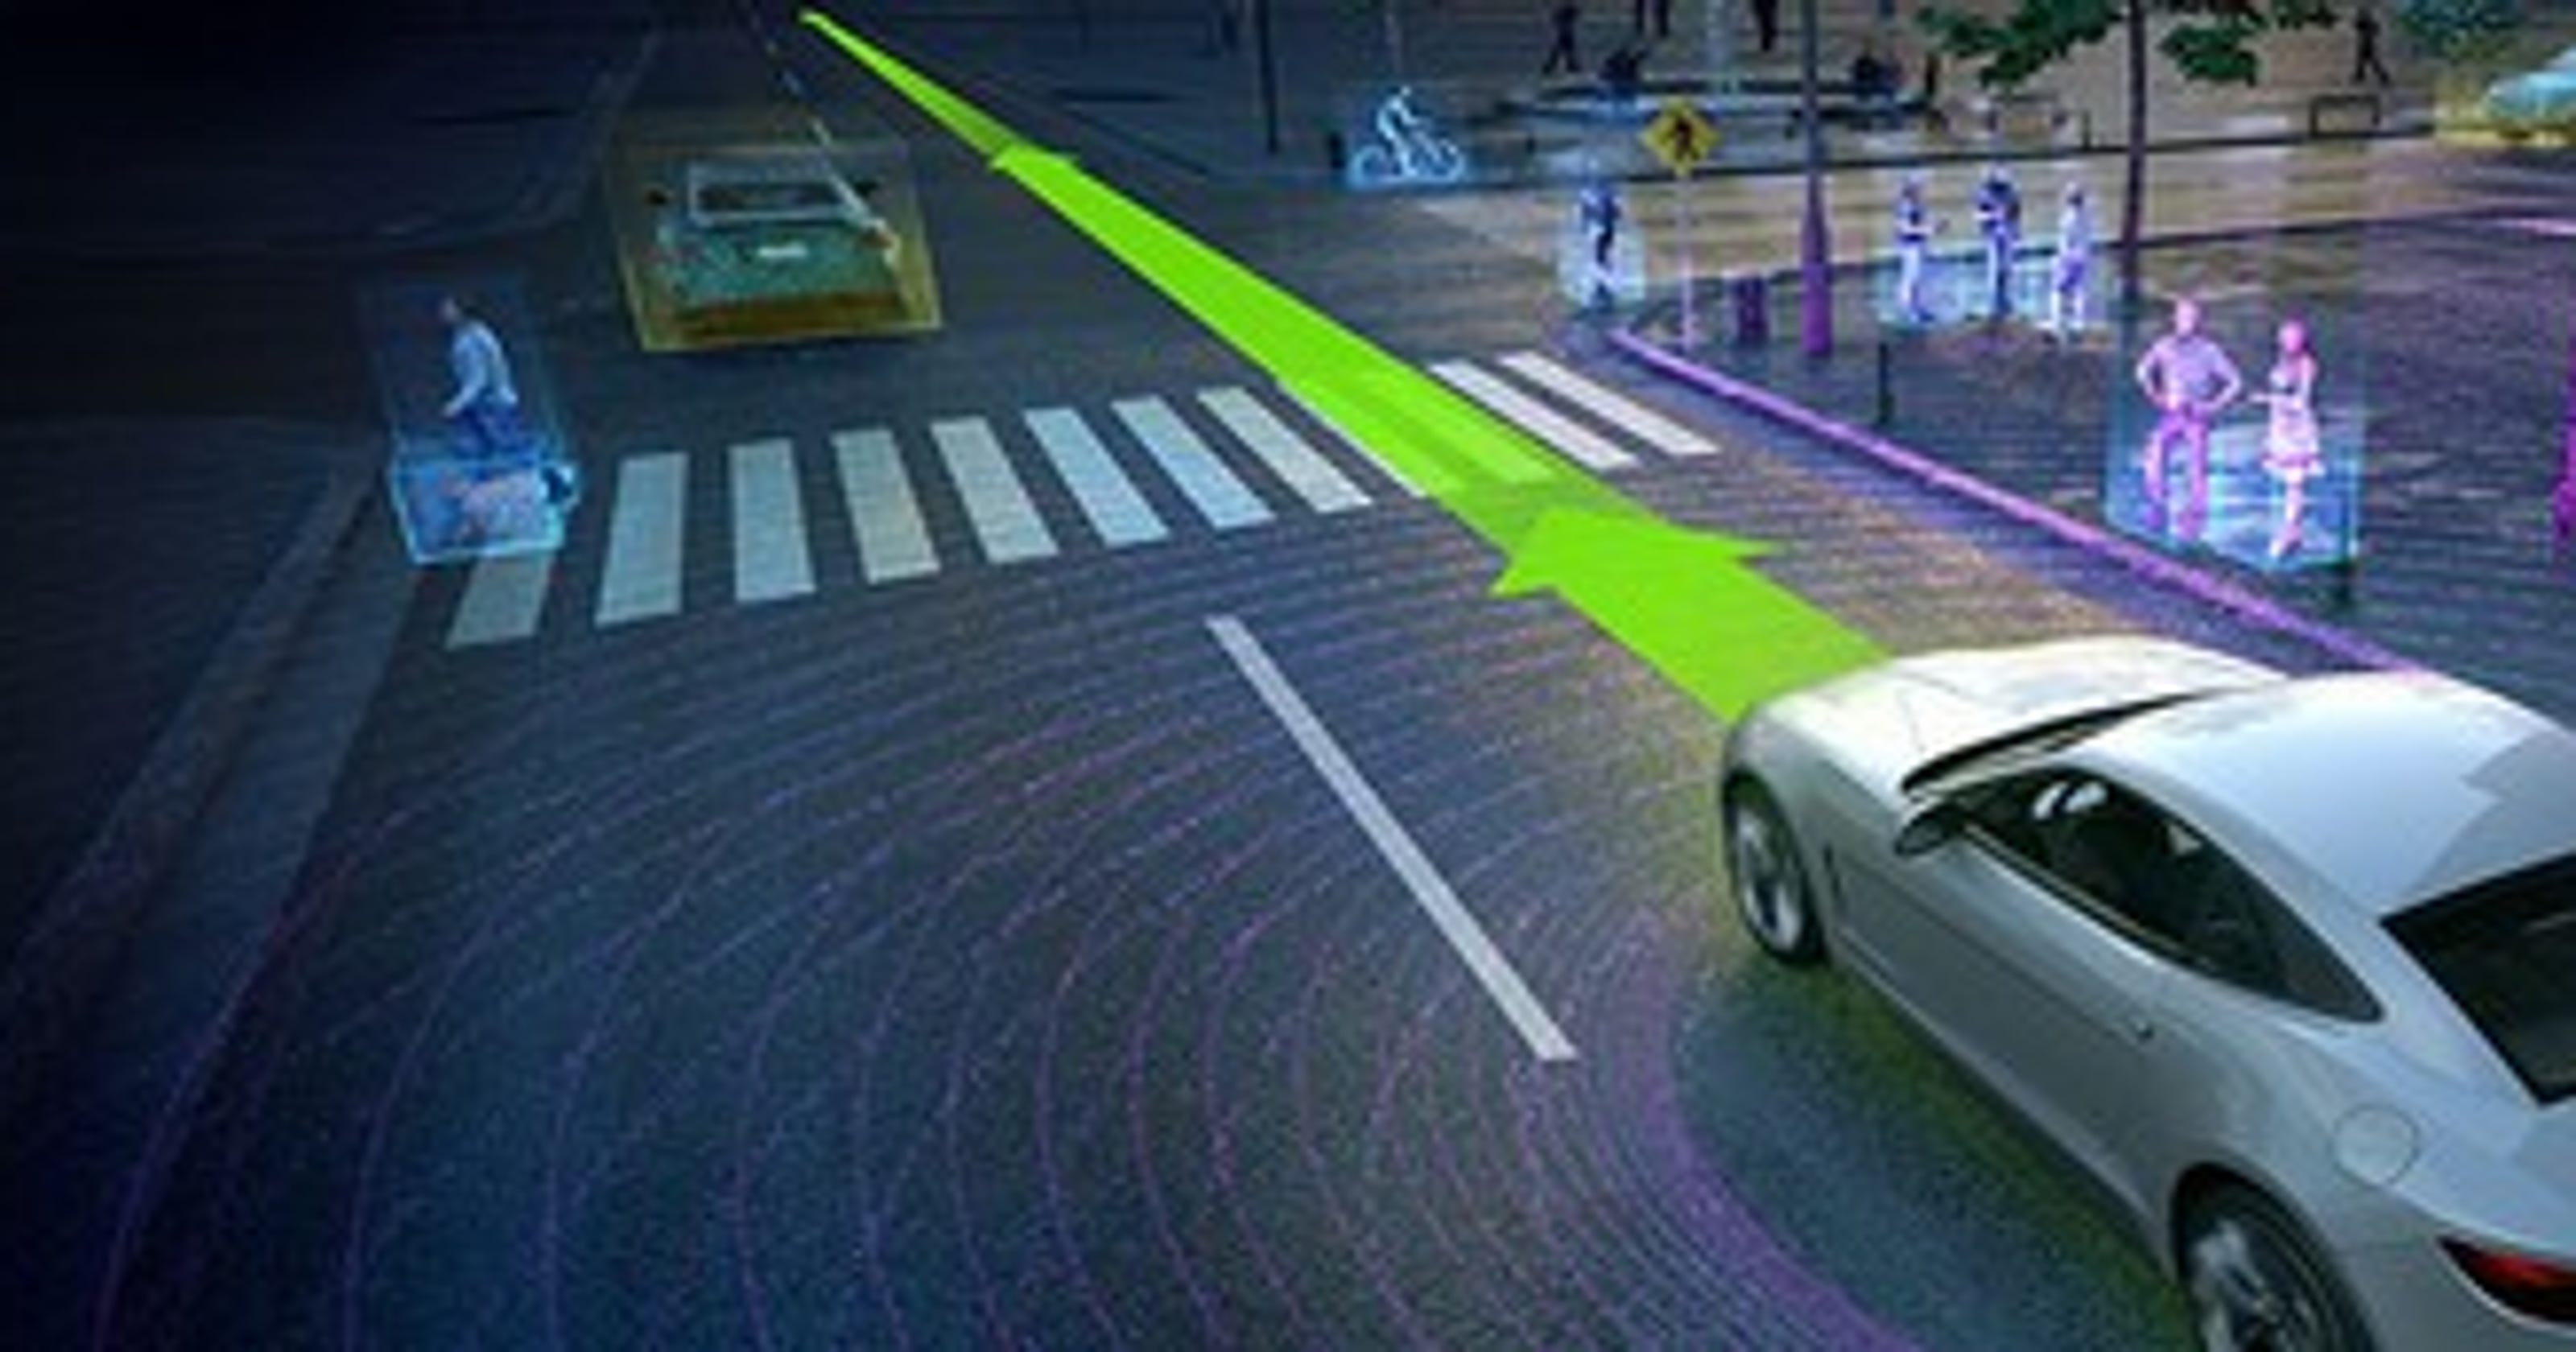 Self-driving cars: We don't need fully autonomous to